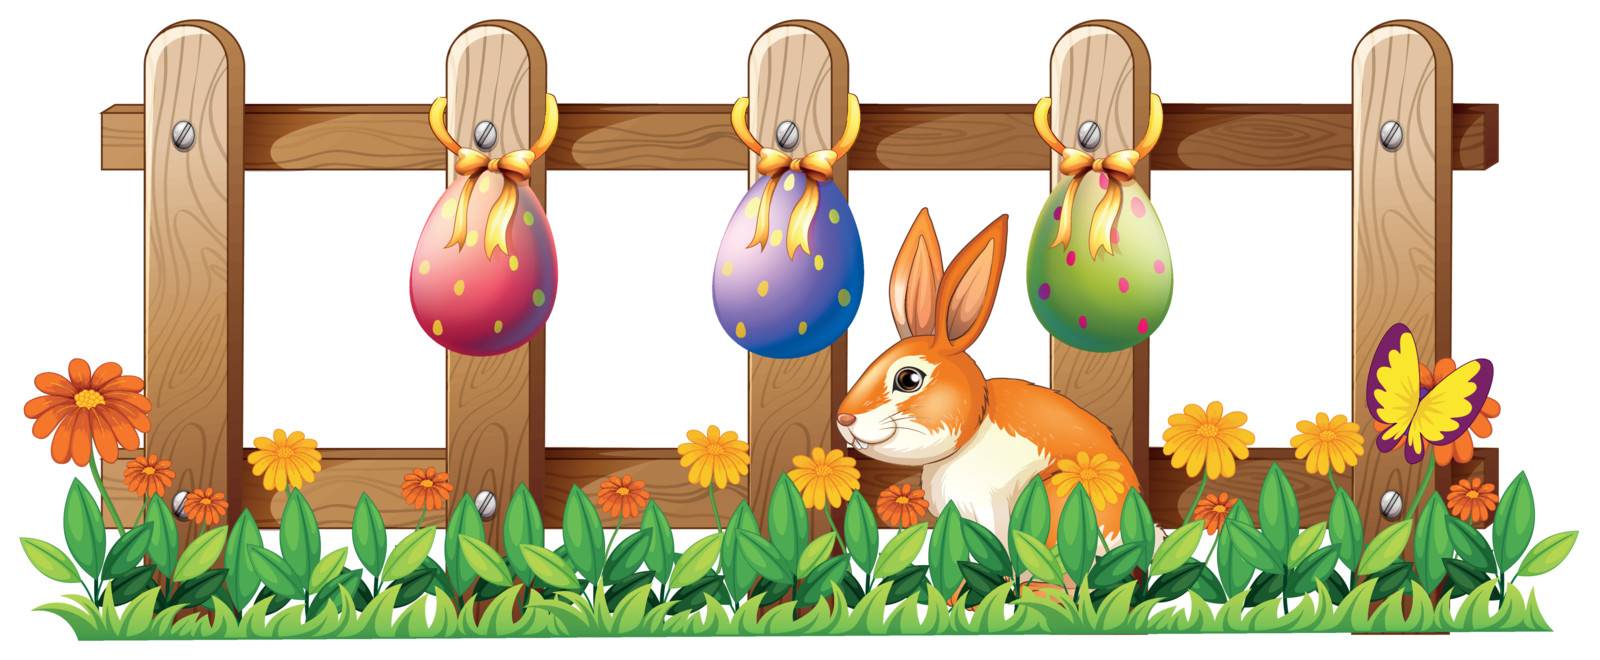 Illustration of the Easter eggs at the fence and a bunny on a white background